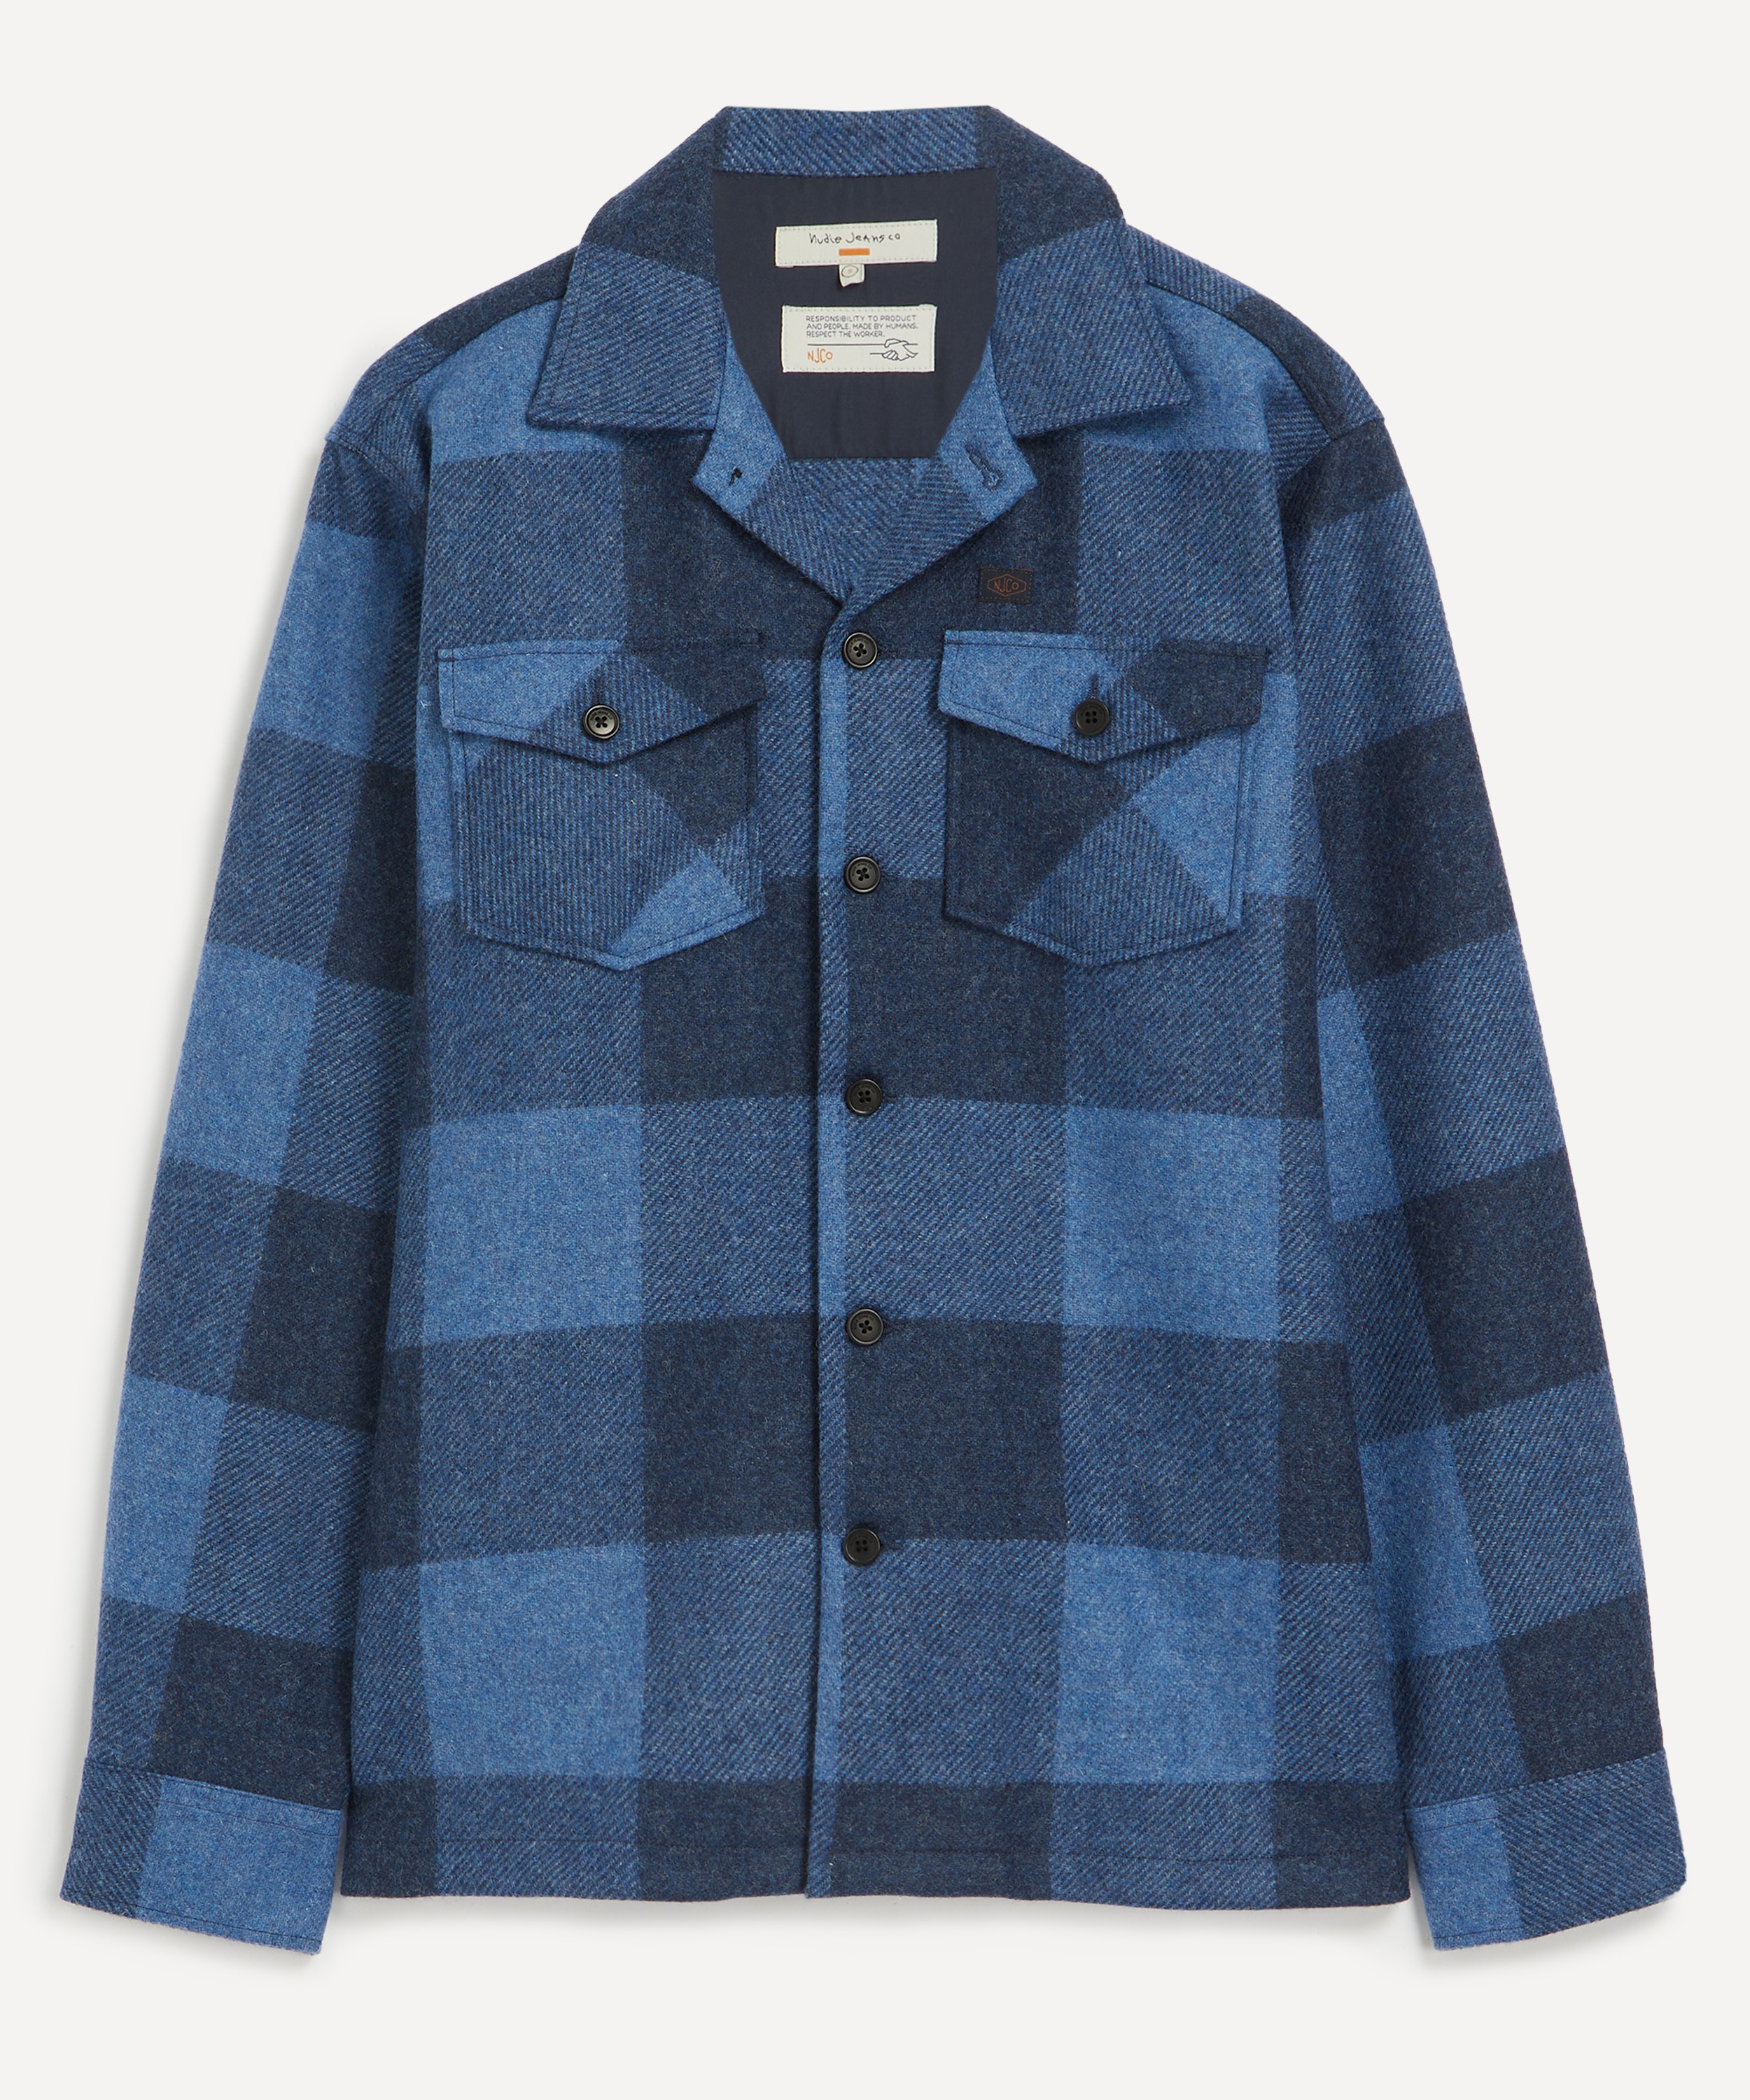 Nudie Jeans - Vincent Buffalo Blue Check Shirt image number 0